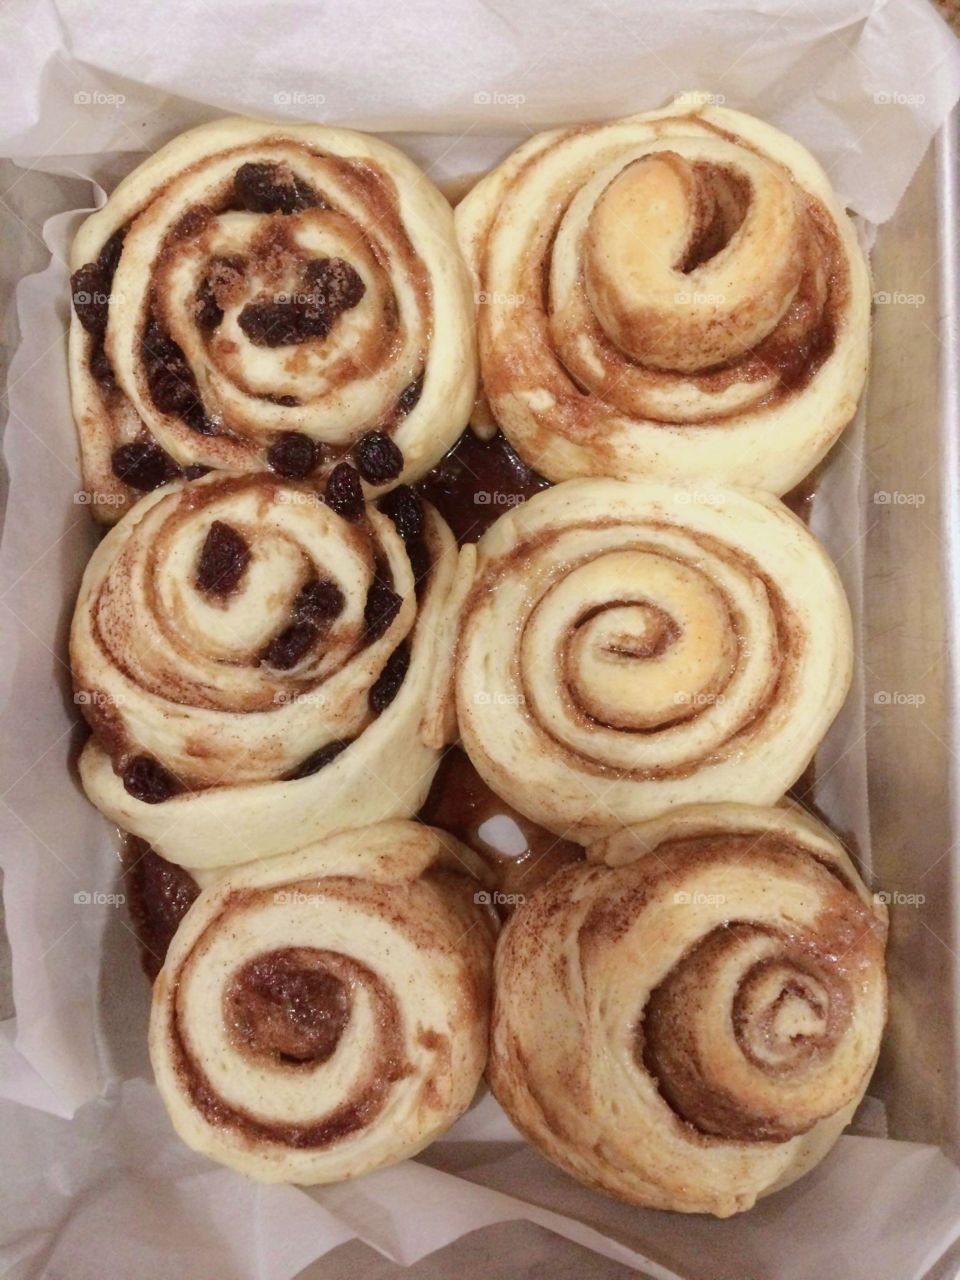 Cinnamon roll, let's talk about Sweet!! #delicious